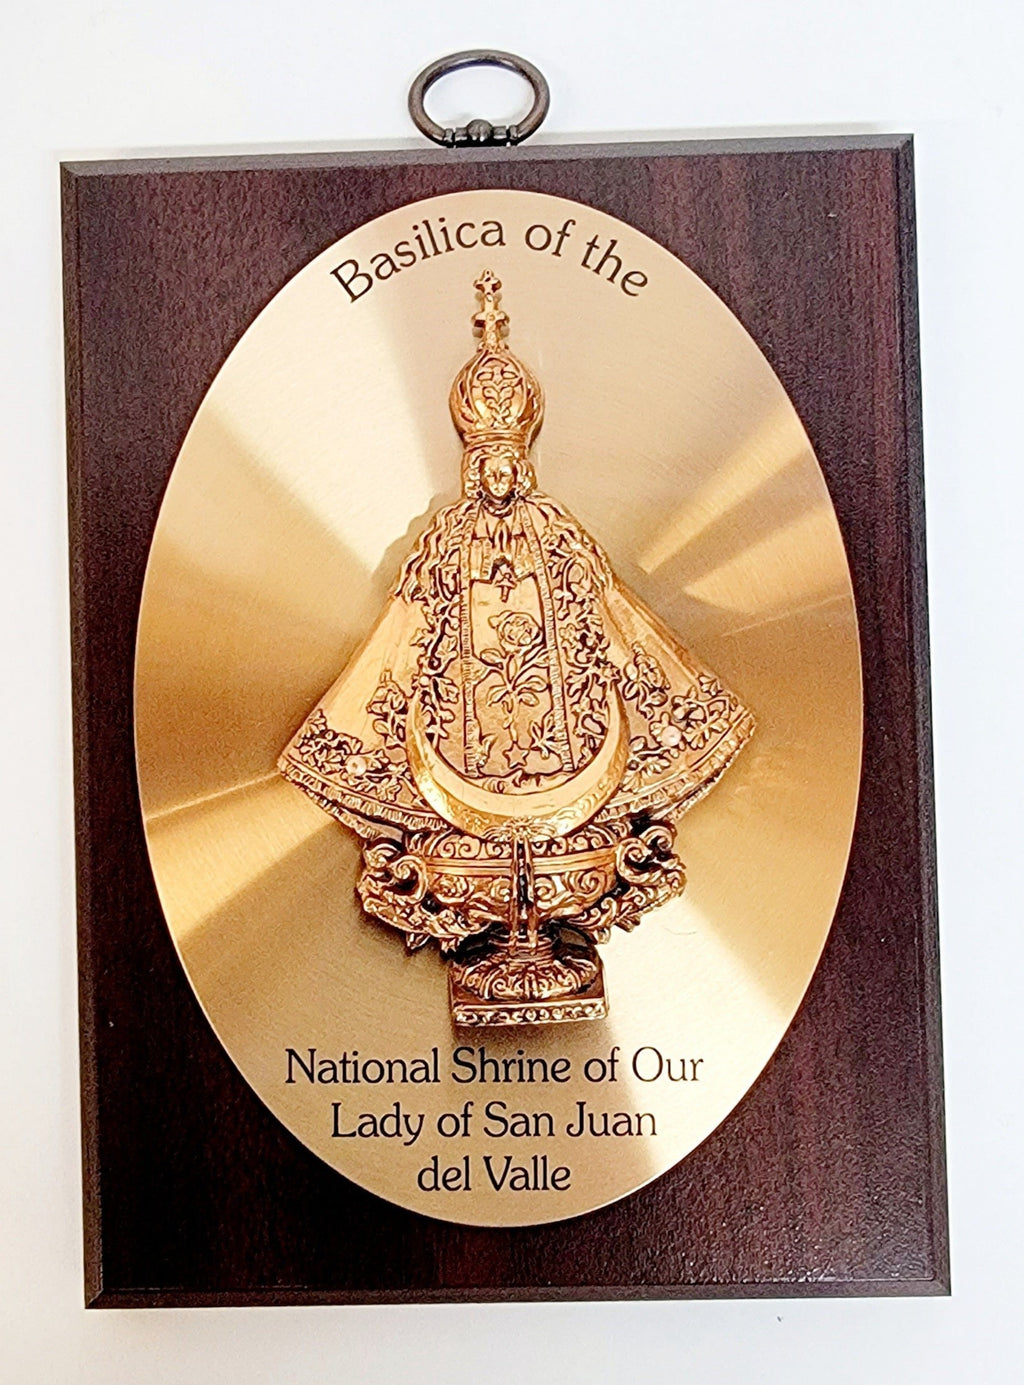 Basilica of the National Shrine of Our Lady of San Juan del Valle Plaque